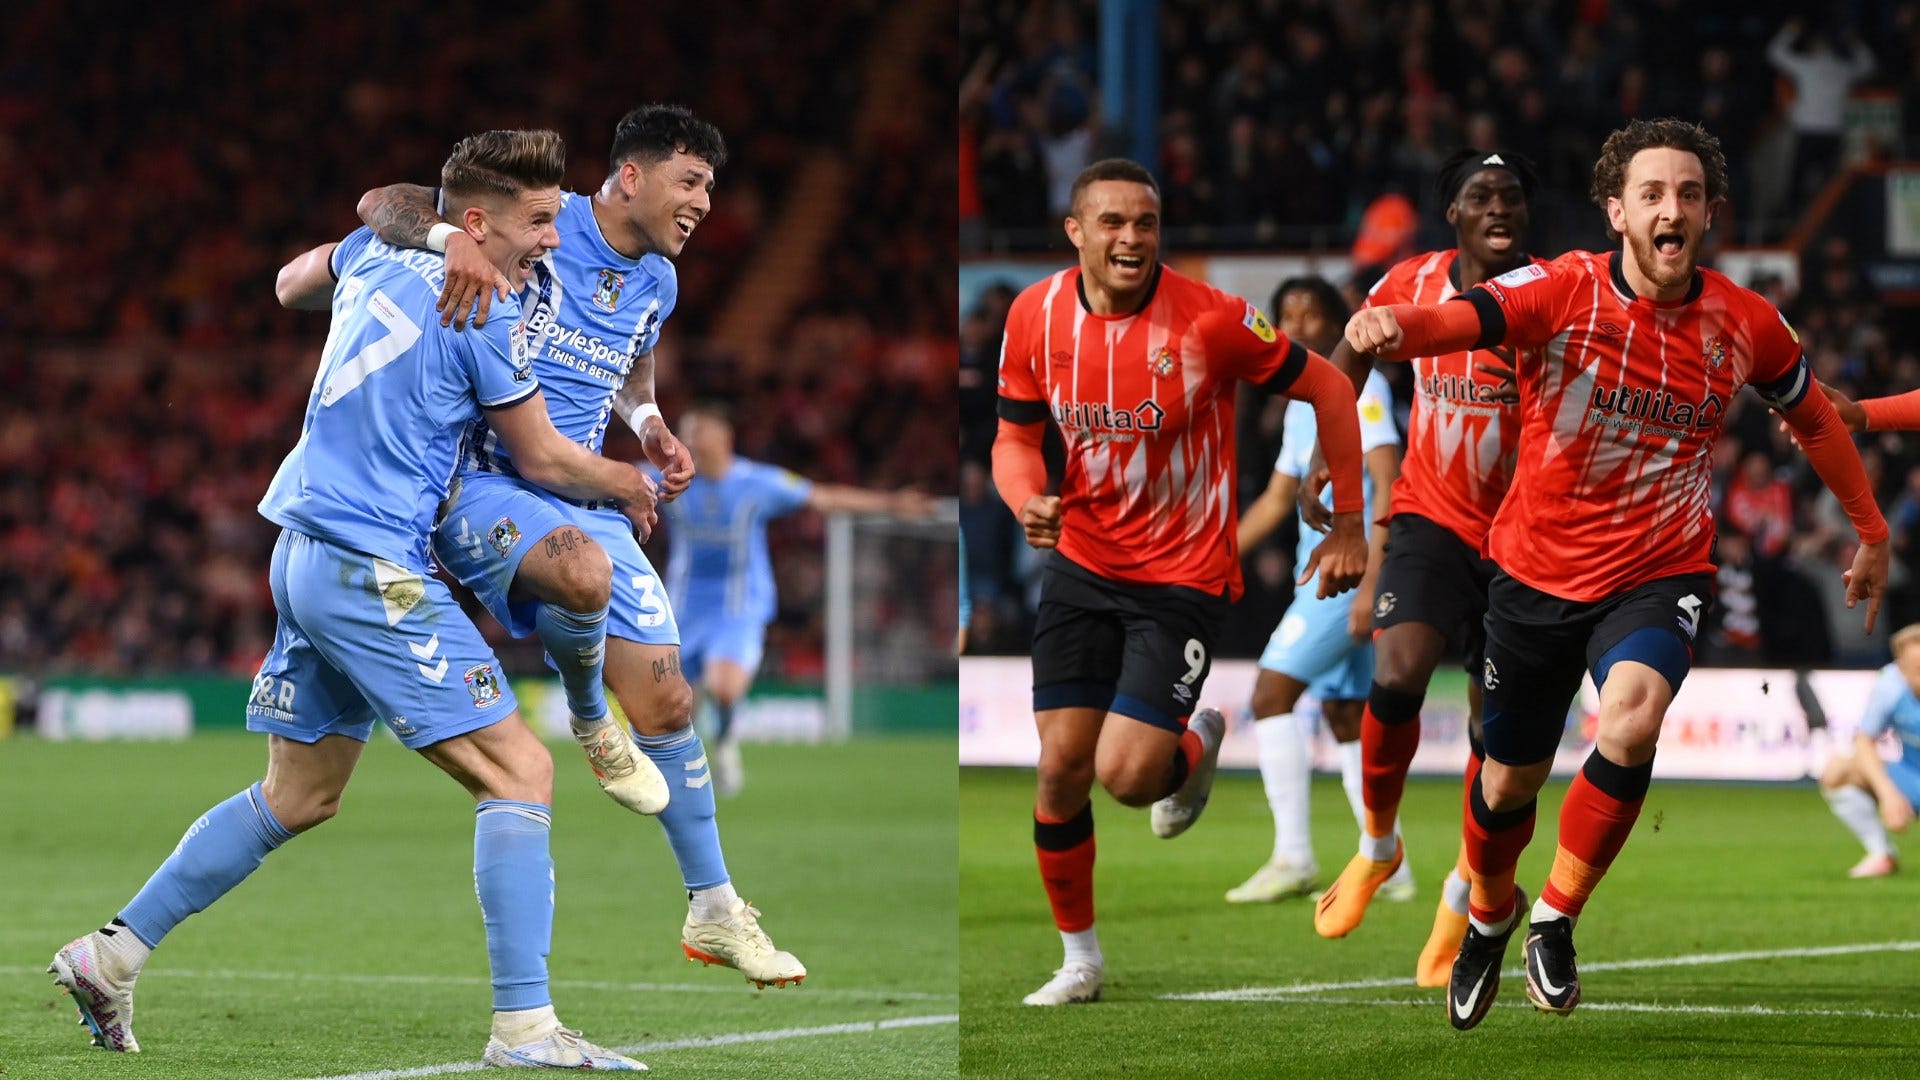 Coventry City vs Luton Town Live stream, TV channel, kick-off time and where to watch Championship play-off final Goal US